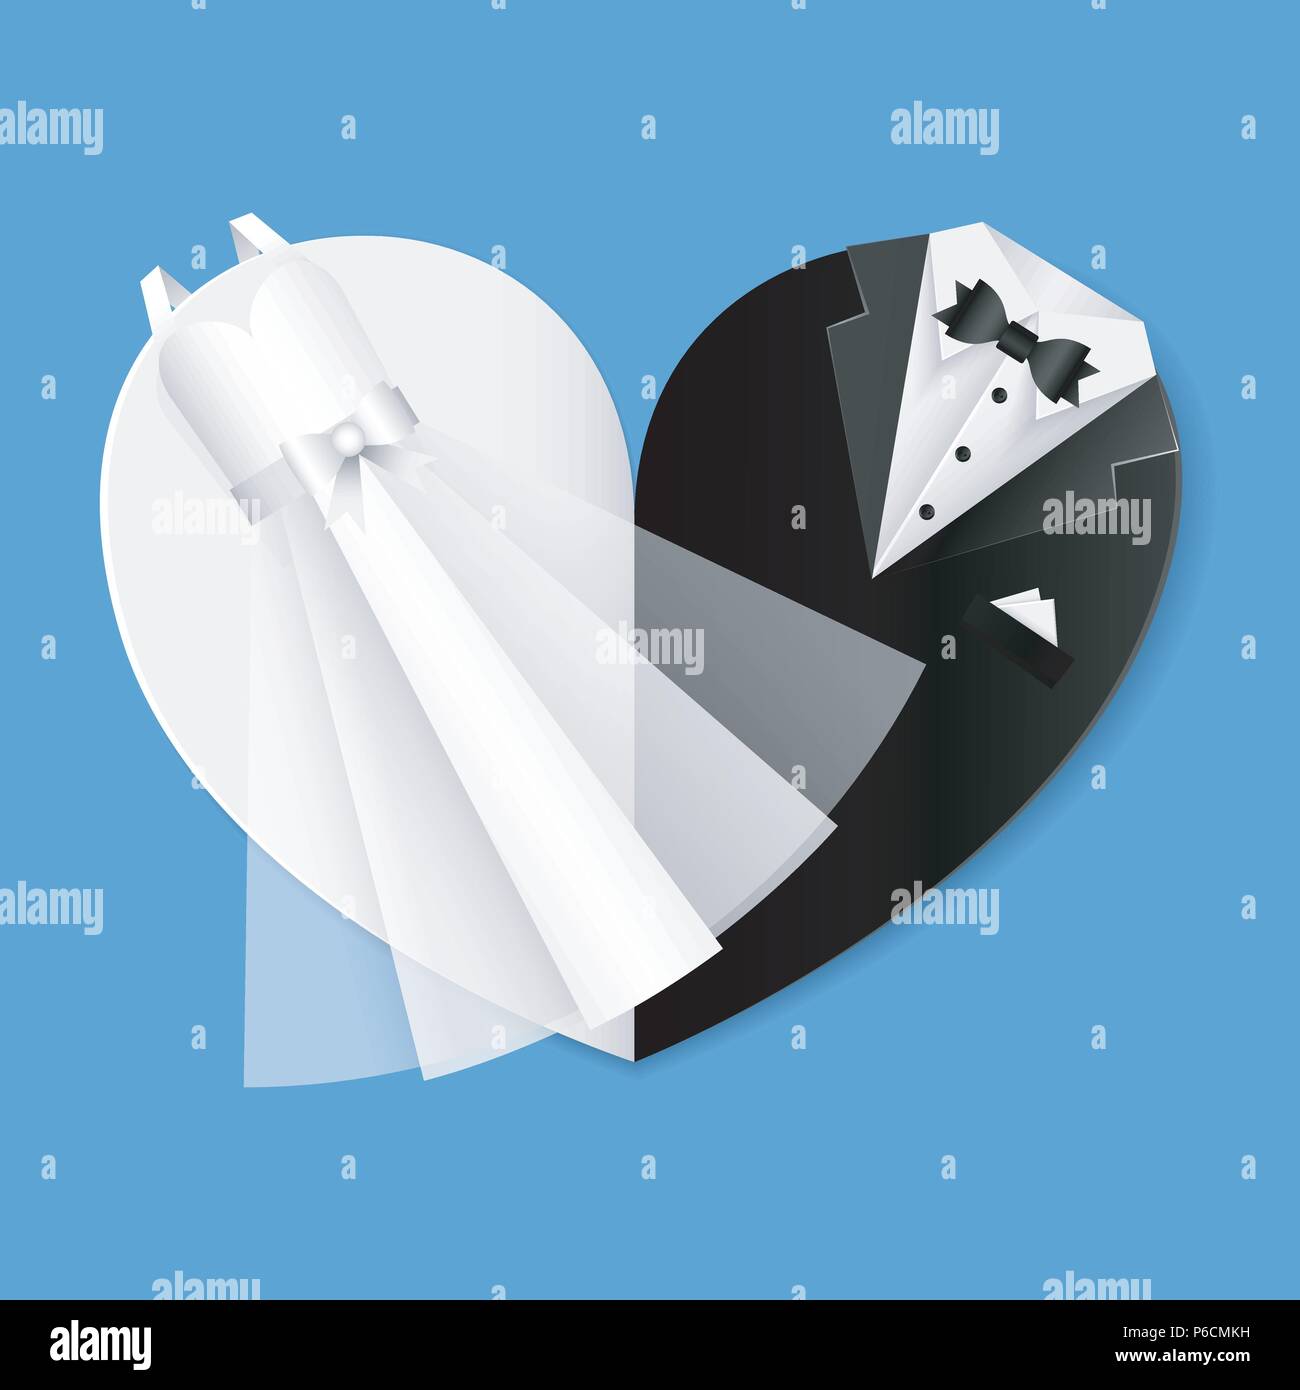 Wedding shape of heart illustration - clothes of the bride and groom hangs diagonally across the heart Stock Vector